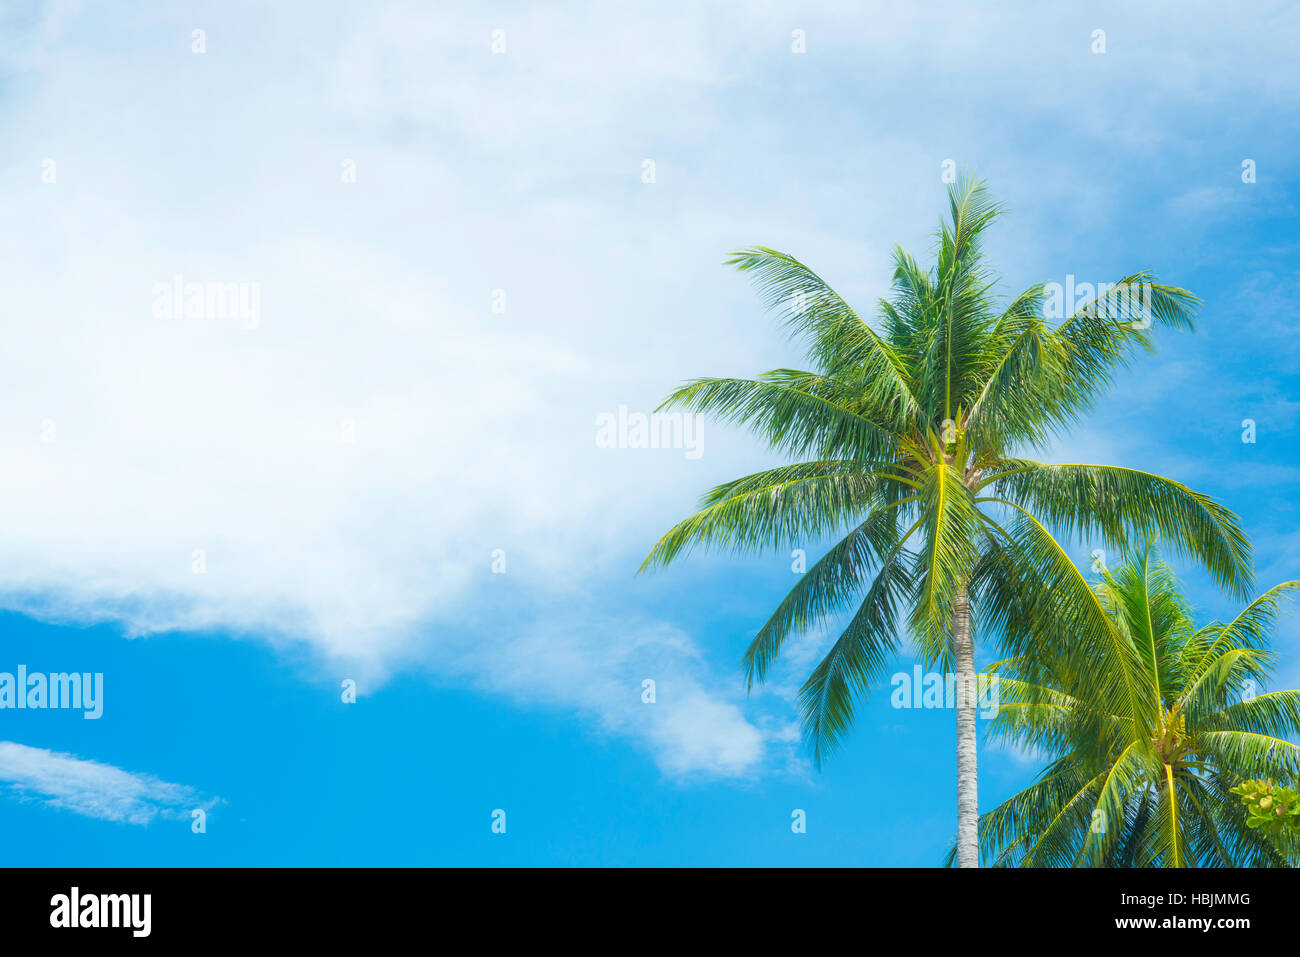 Open blue sky with tropical coconut trees in a calm and peaceful atmosphere setting. Landscape photography of tropical scenery in Koh Samui Island Stock Photo